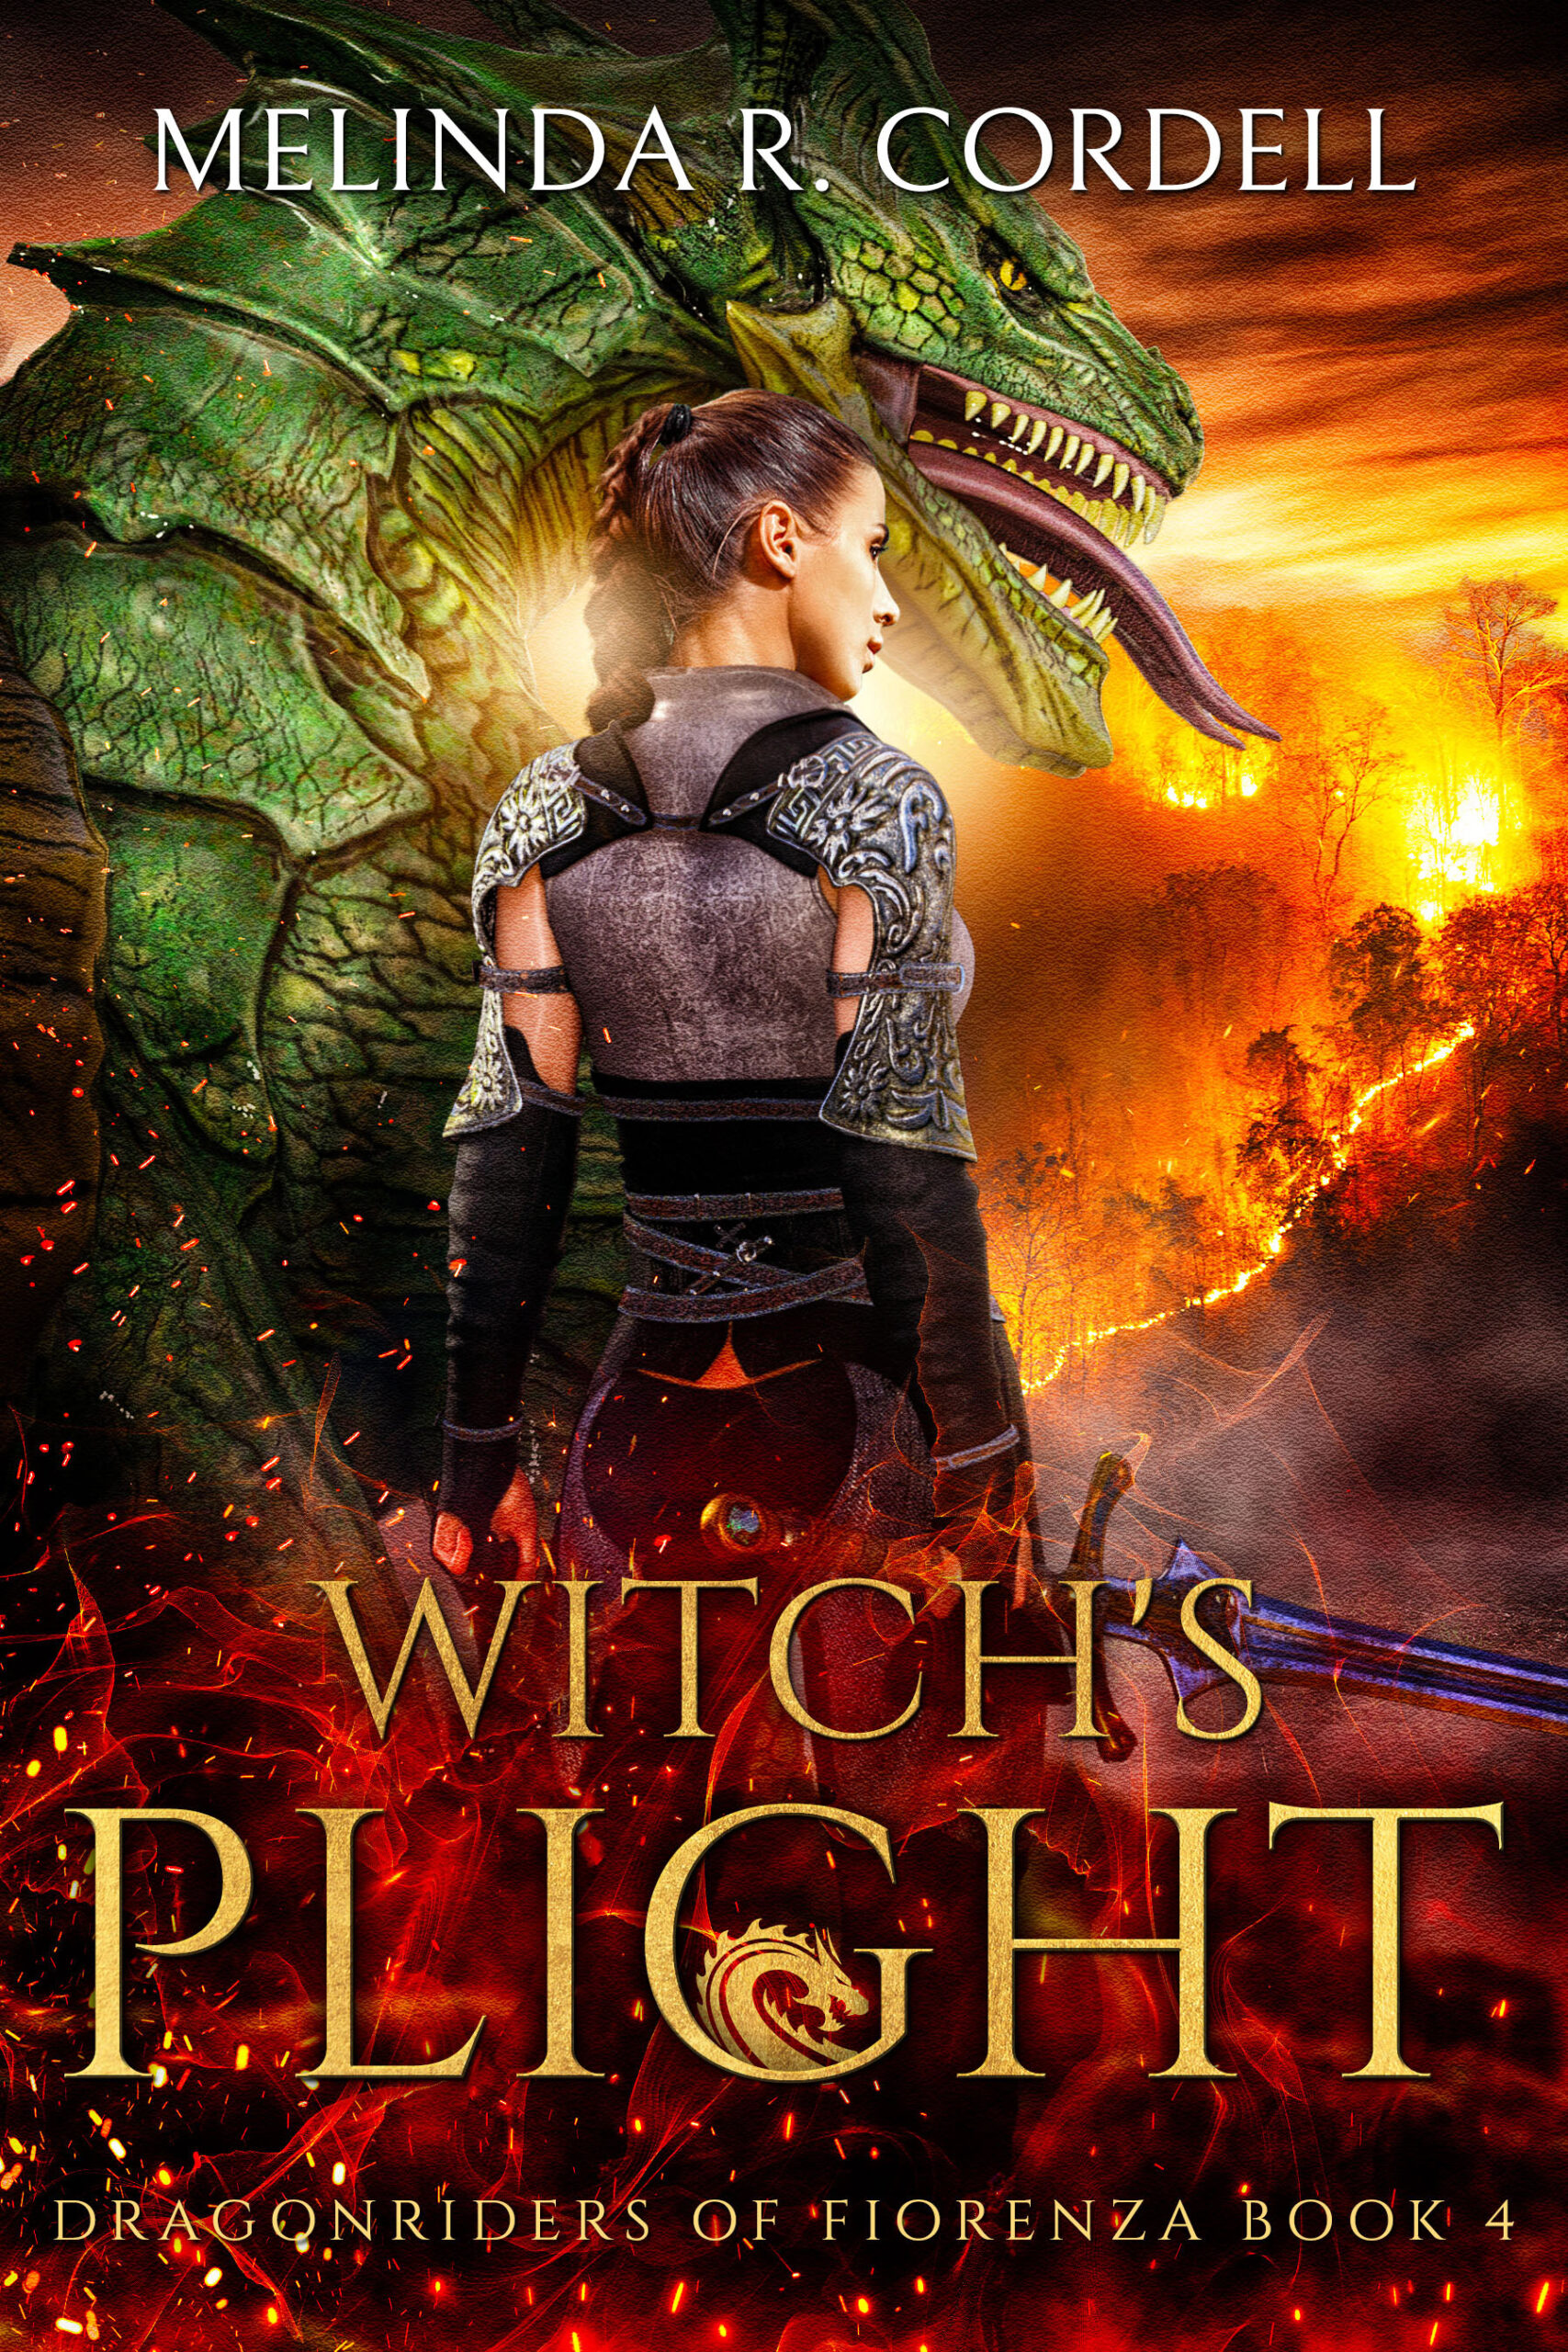 Witch's Plight cover for book 4 of the dragonriders of fiorenza yayy